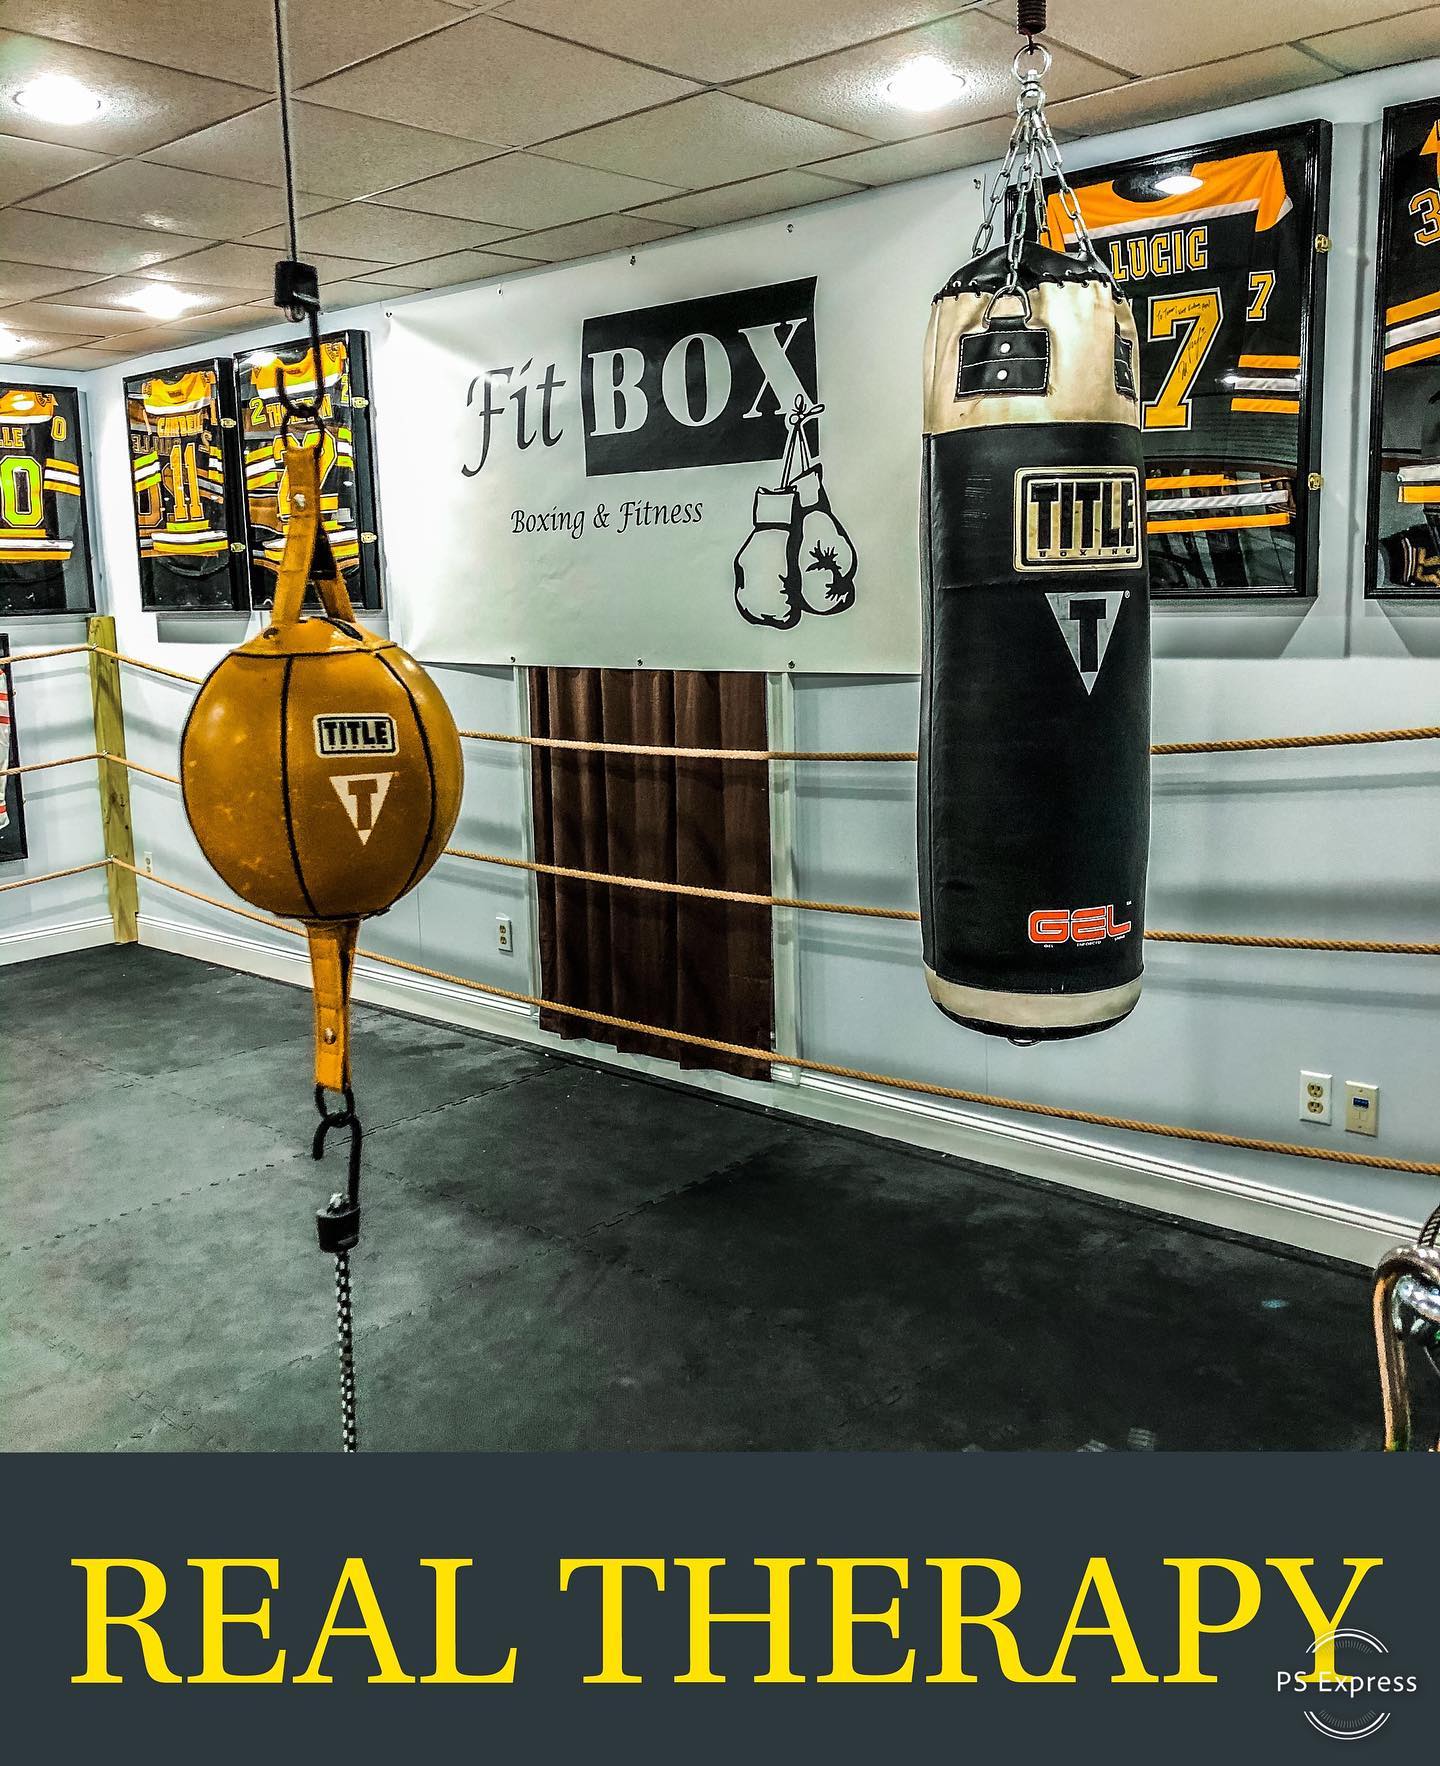 ... It’s been a long 2020 and we all deserve to punch something . www.fitboxdedham.com @tommymcinerney .
.